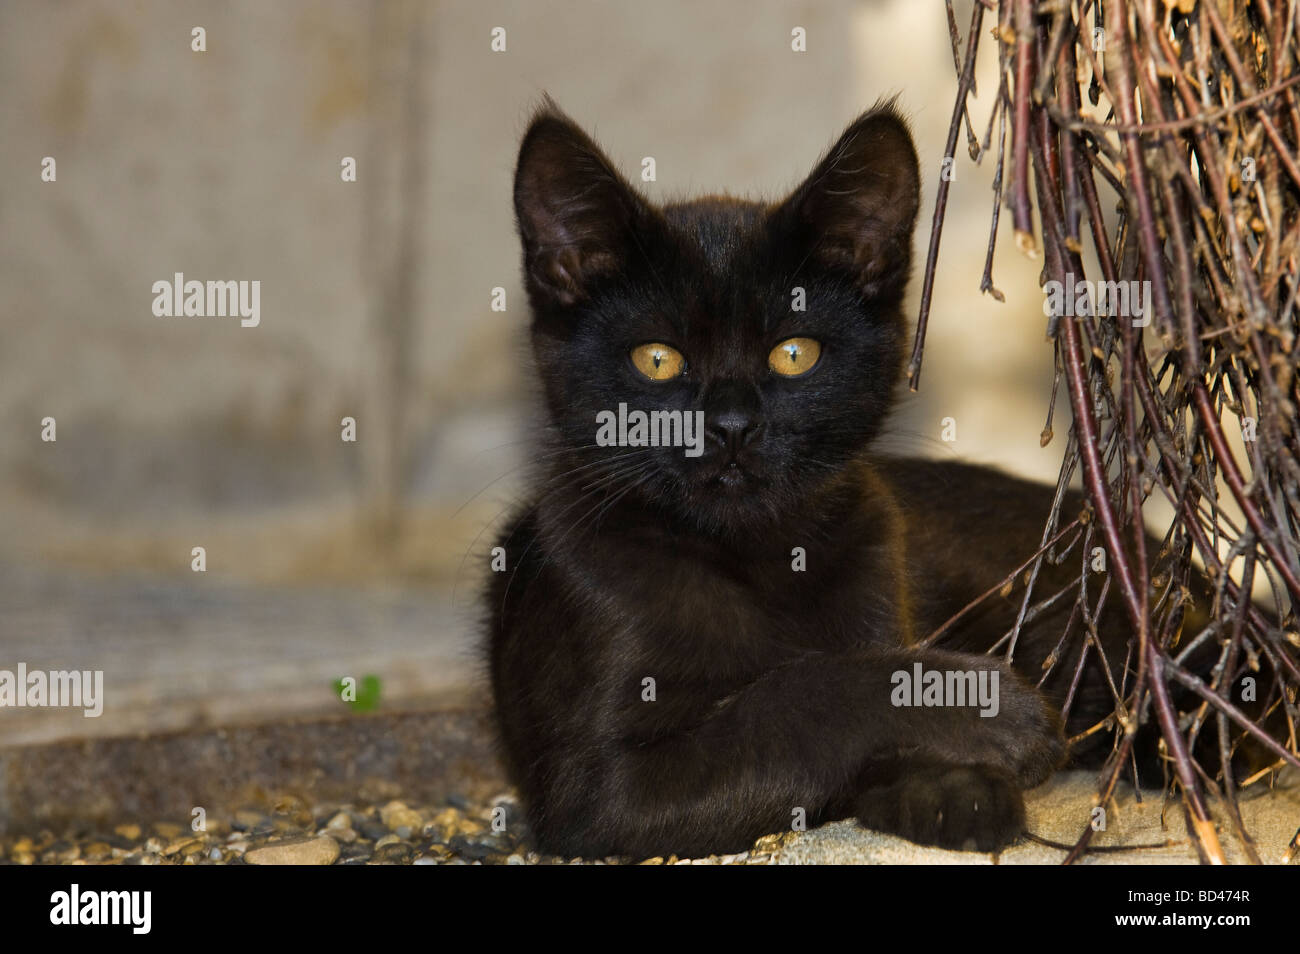 young black cat with mysterious yellow EYES kitten outdoor lay laying look looking animal cat kitten evening light  cateye eye g Stock Photo